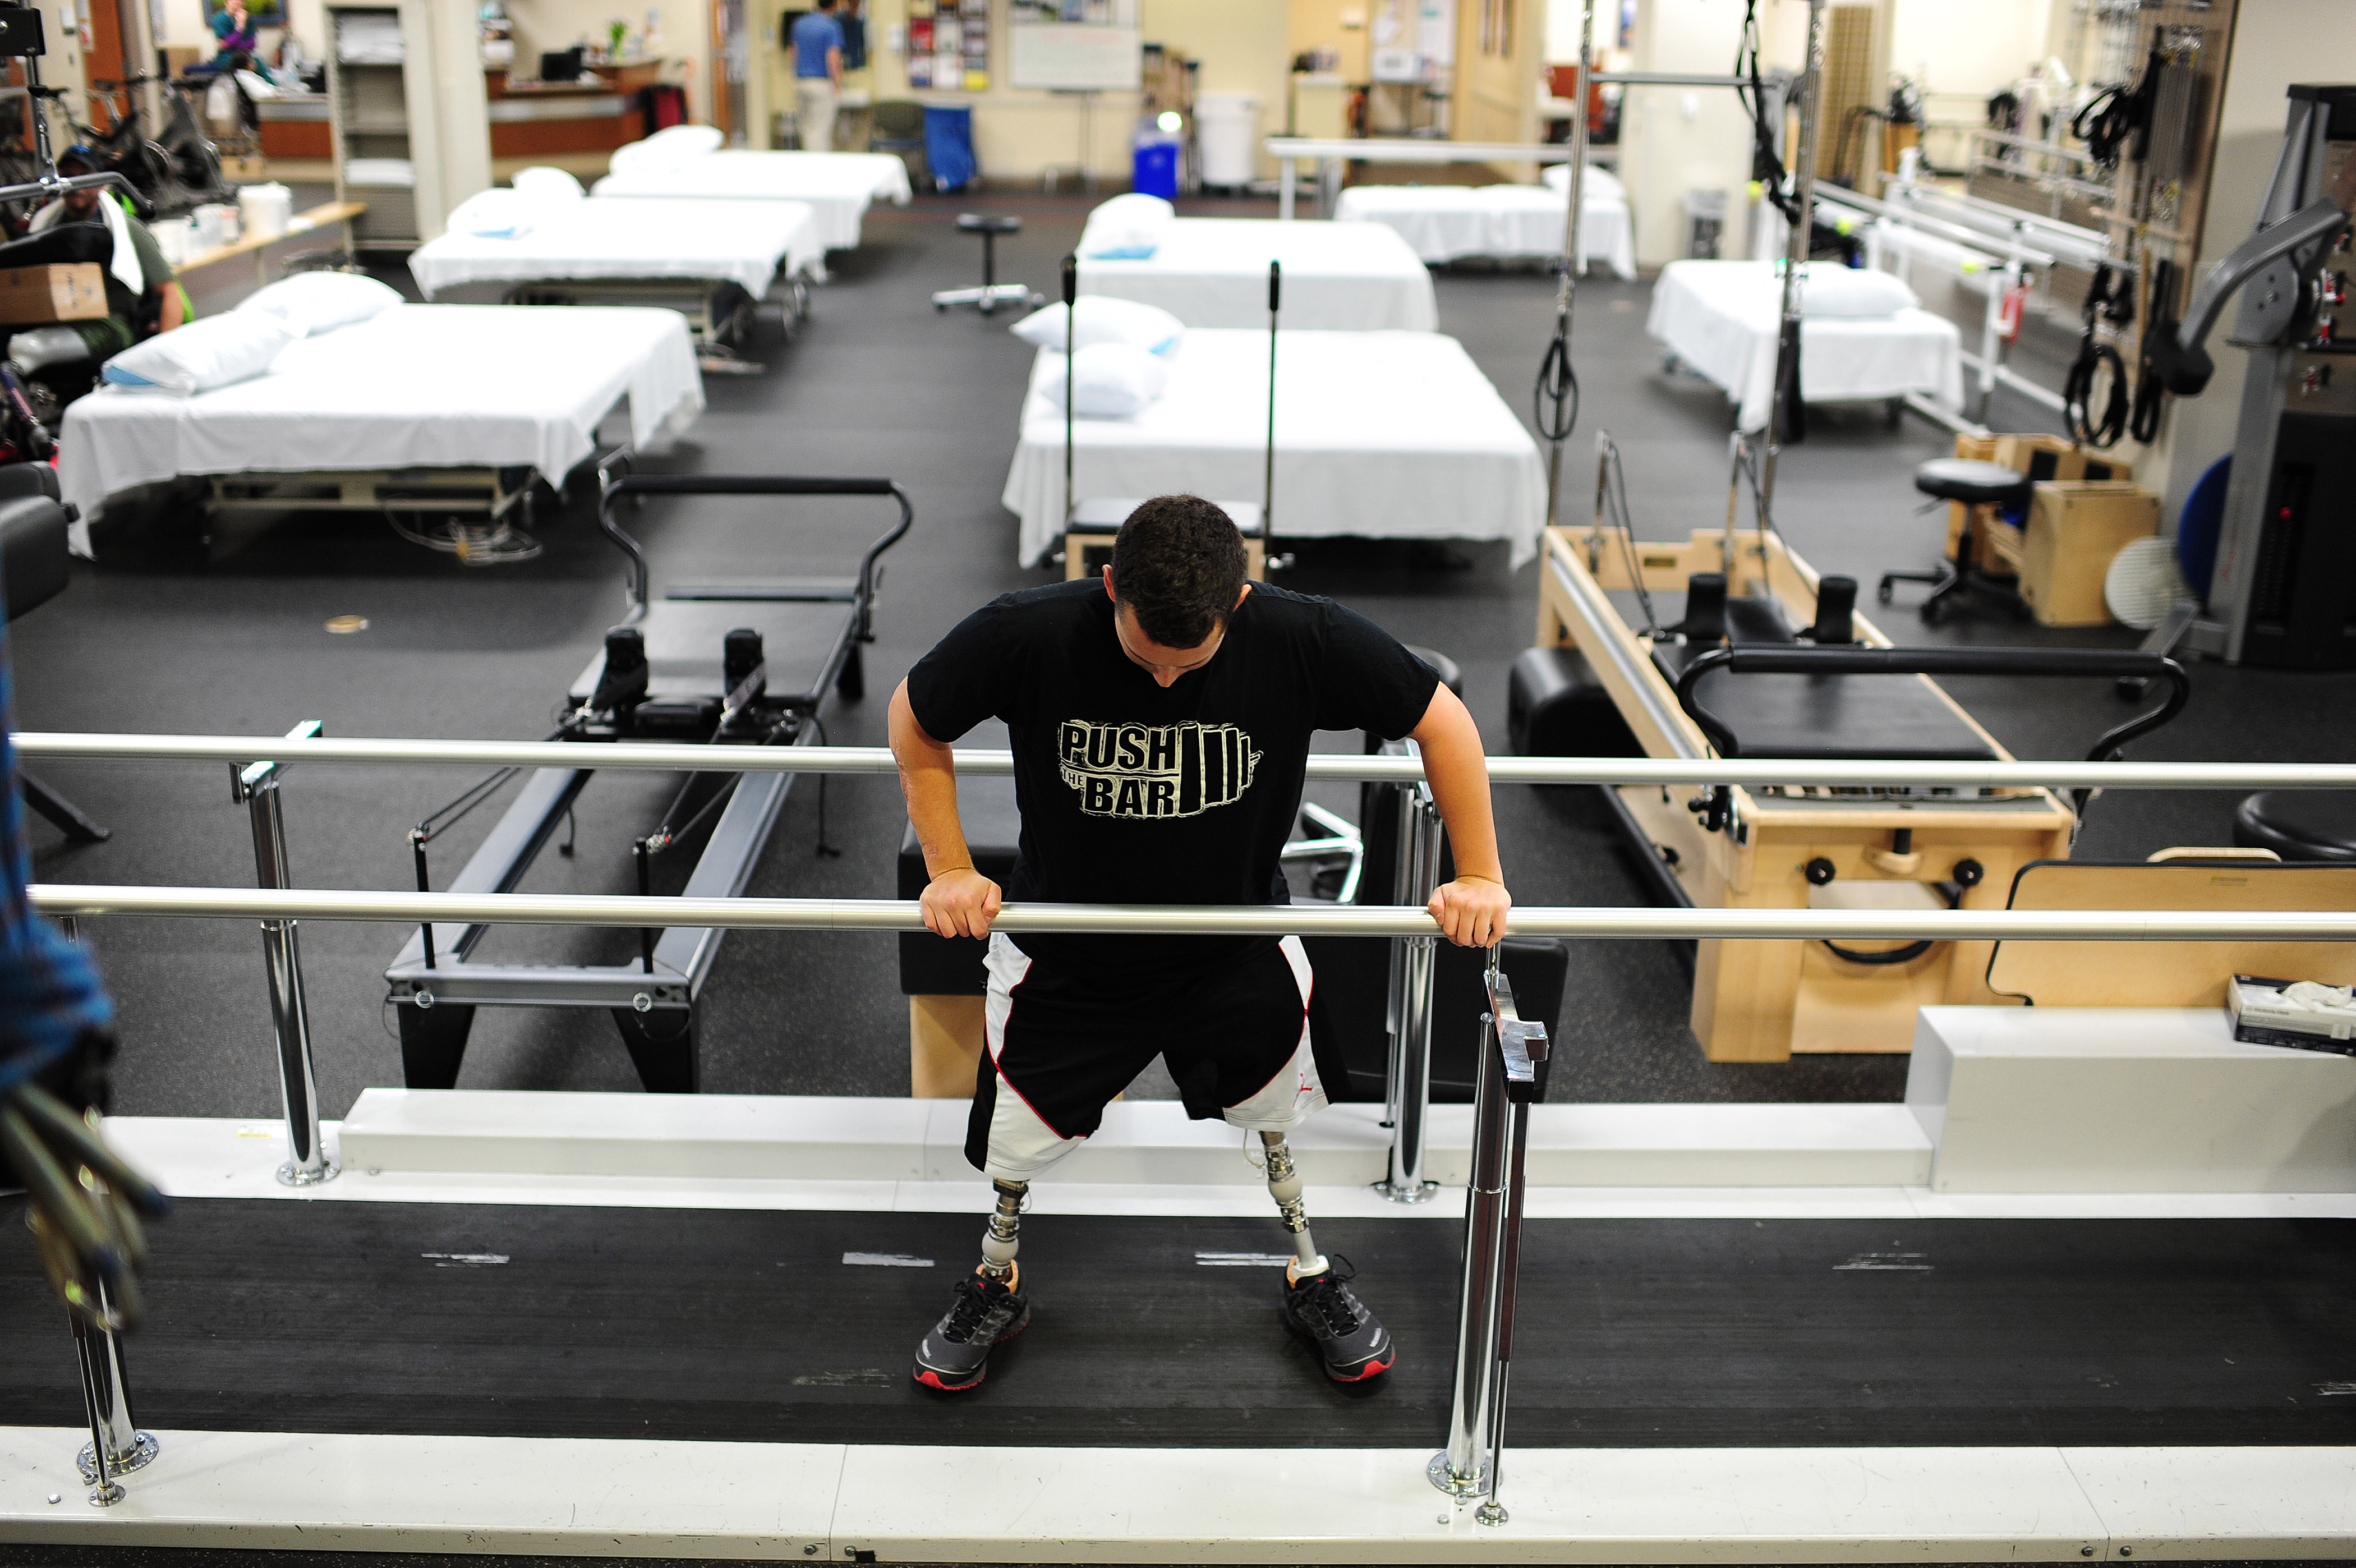 U.S. Army Staff Sgt. Sam Shockley works on his balancing and walking with prosthetic legs as he rehabs at Walter Reed National Military Medical Center on Friday May 09, 2014 in Bethesda, MD.  The center plays a crucial role in rehabbing those who suffered traumatic injuries. (Matt McClain—The Washington Post/Getty Images)